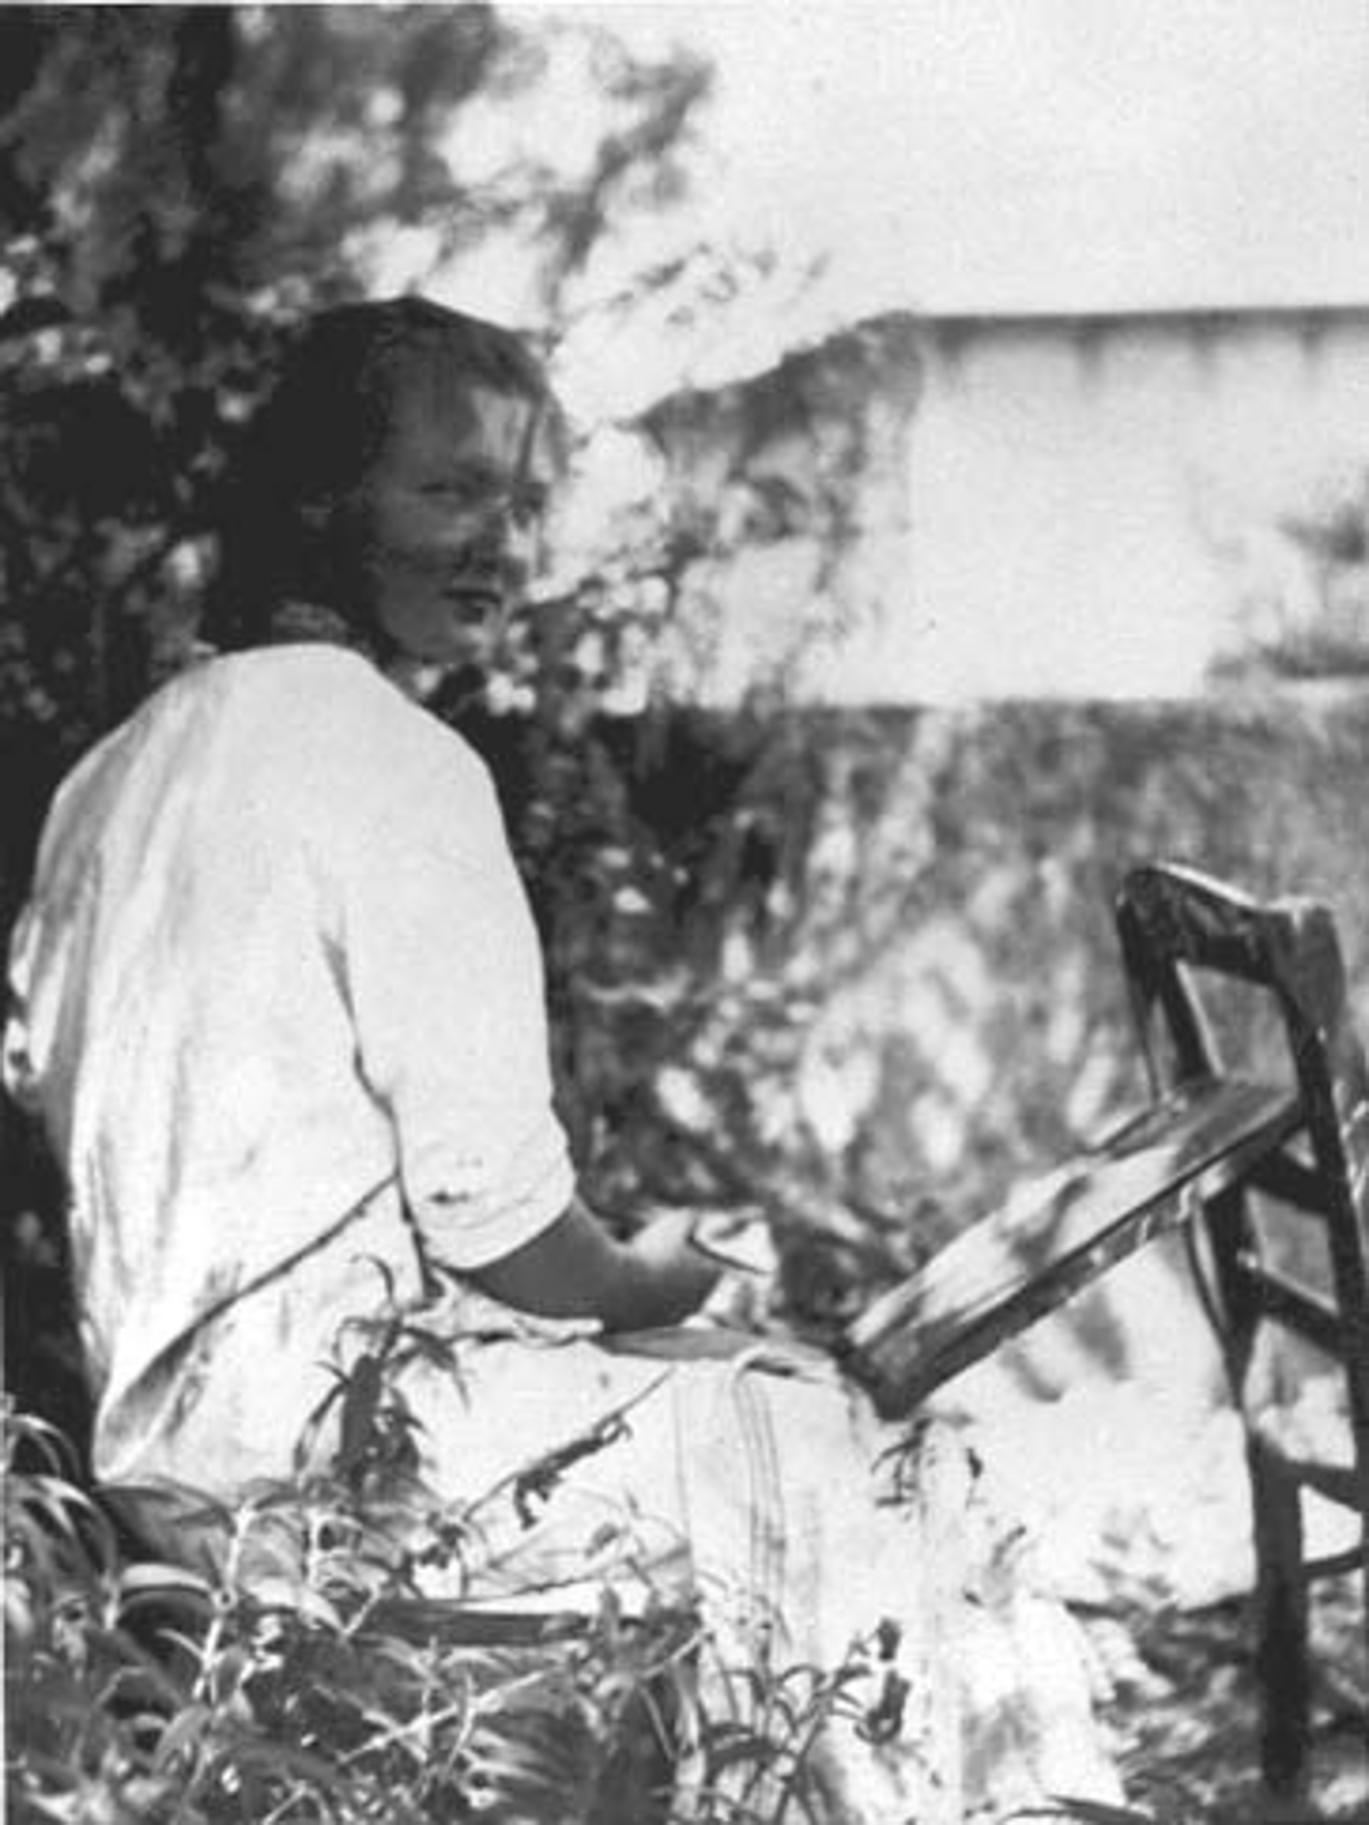 Photo of Charlotte Salomon, painting in a garden.